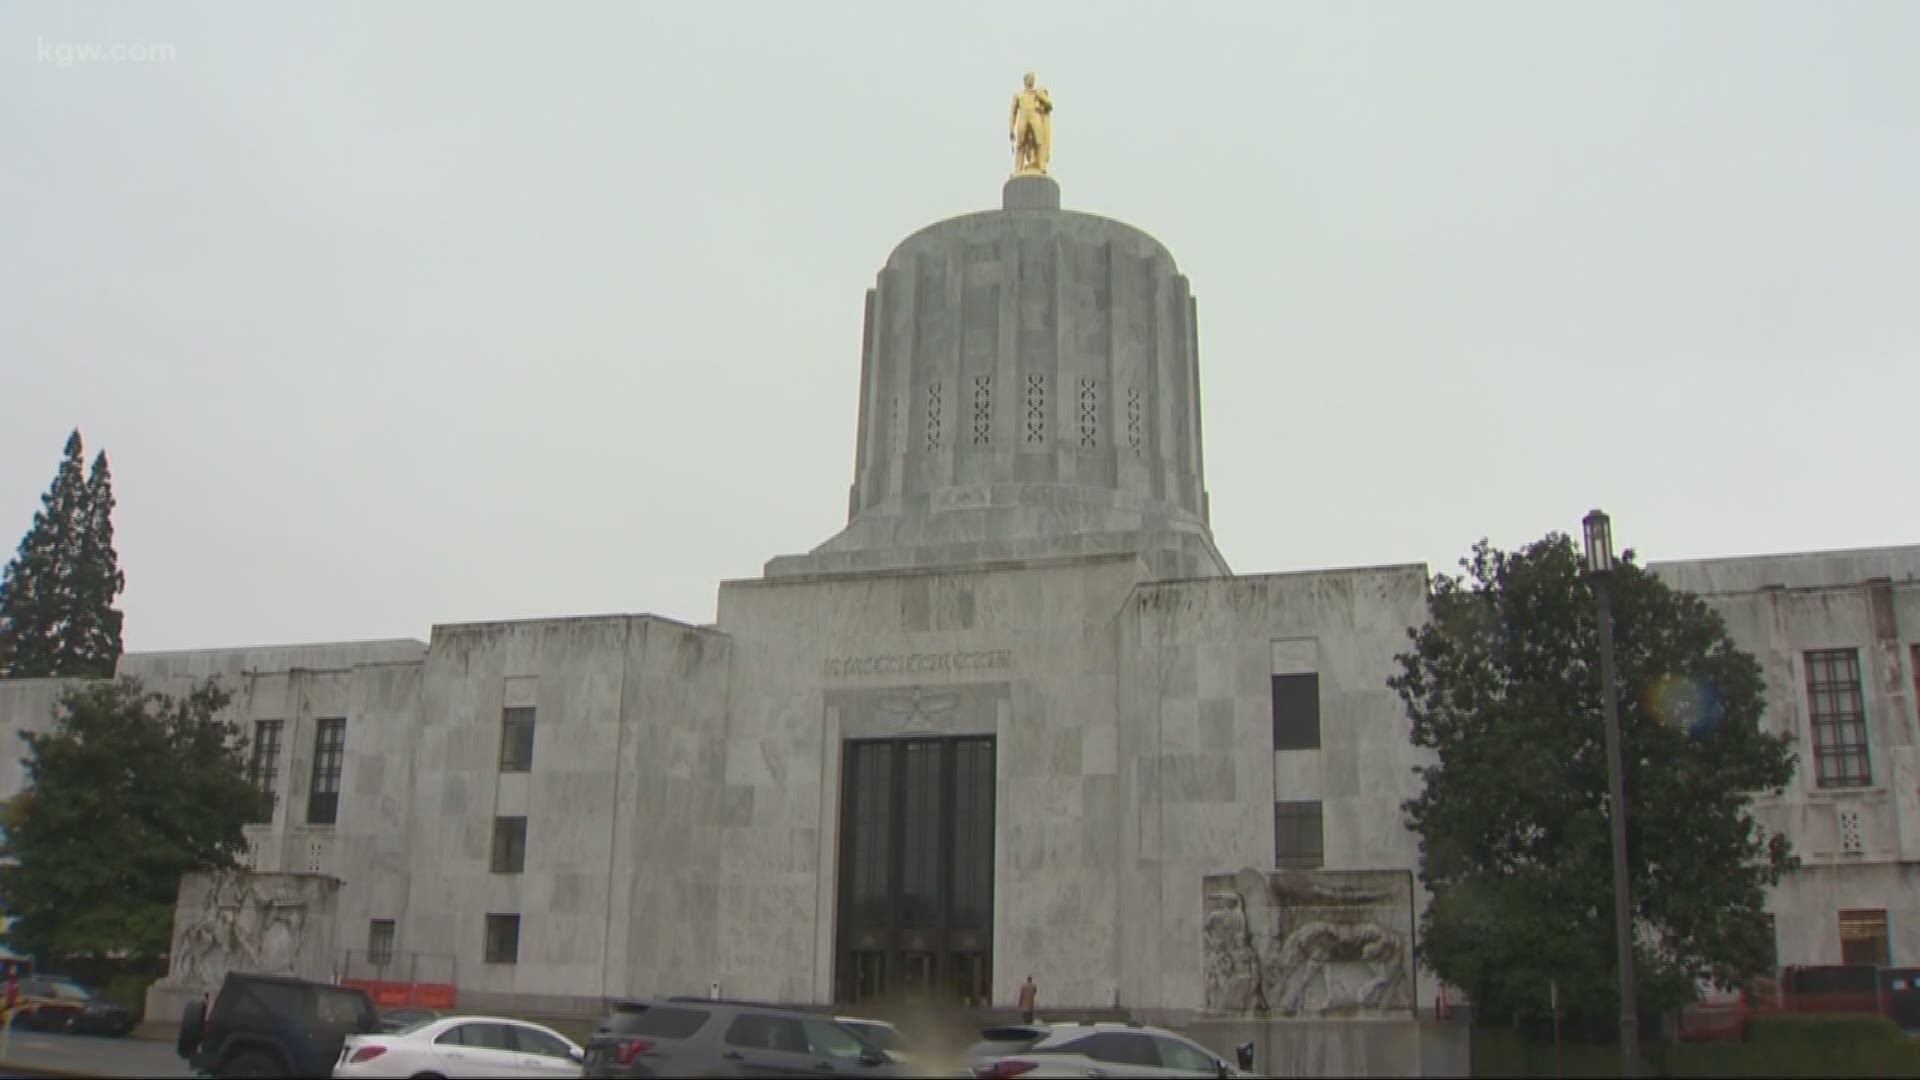 More than a $1 billion kicker rebate could be in store for Oregon taxpayers.